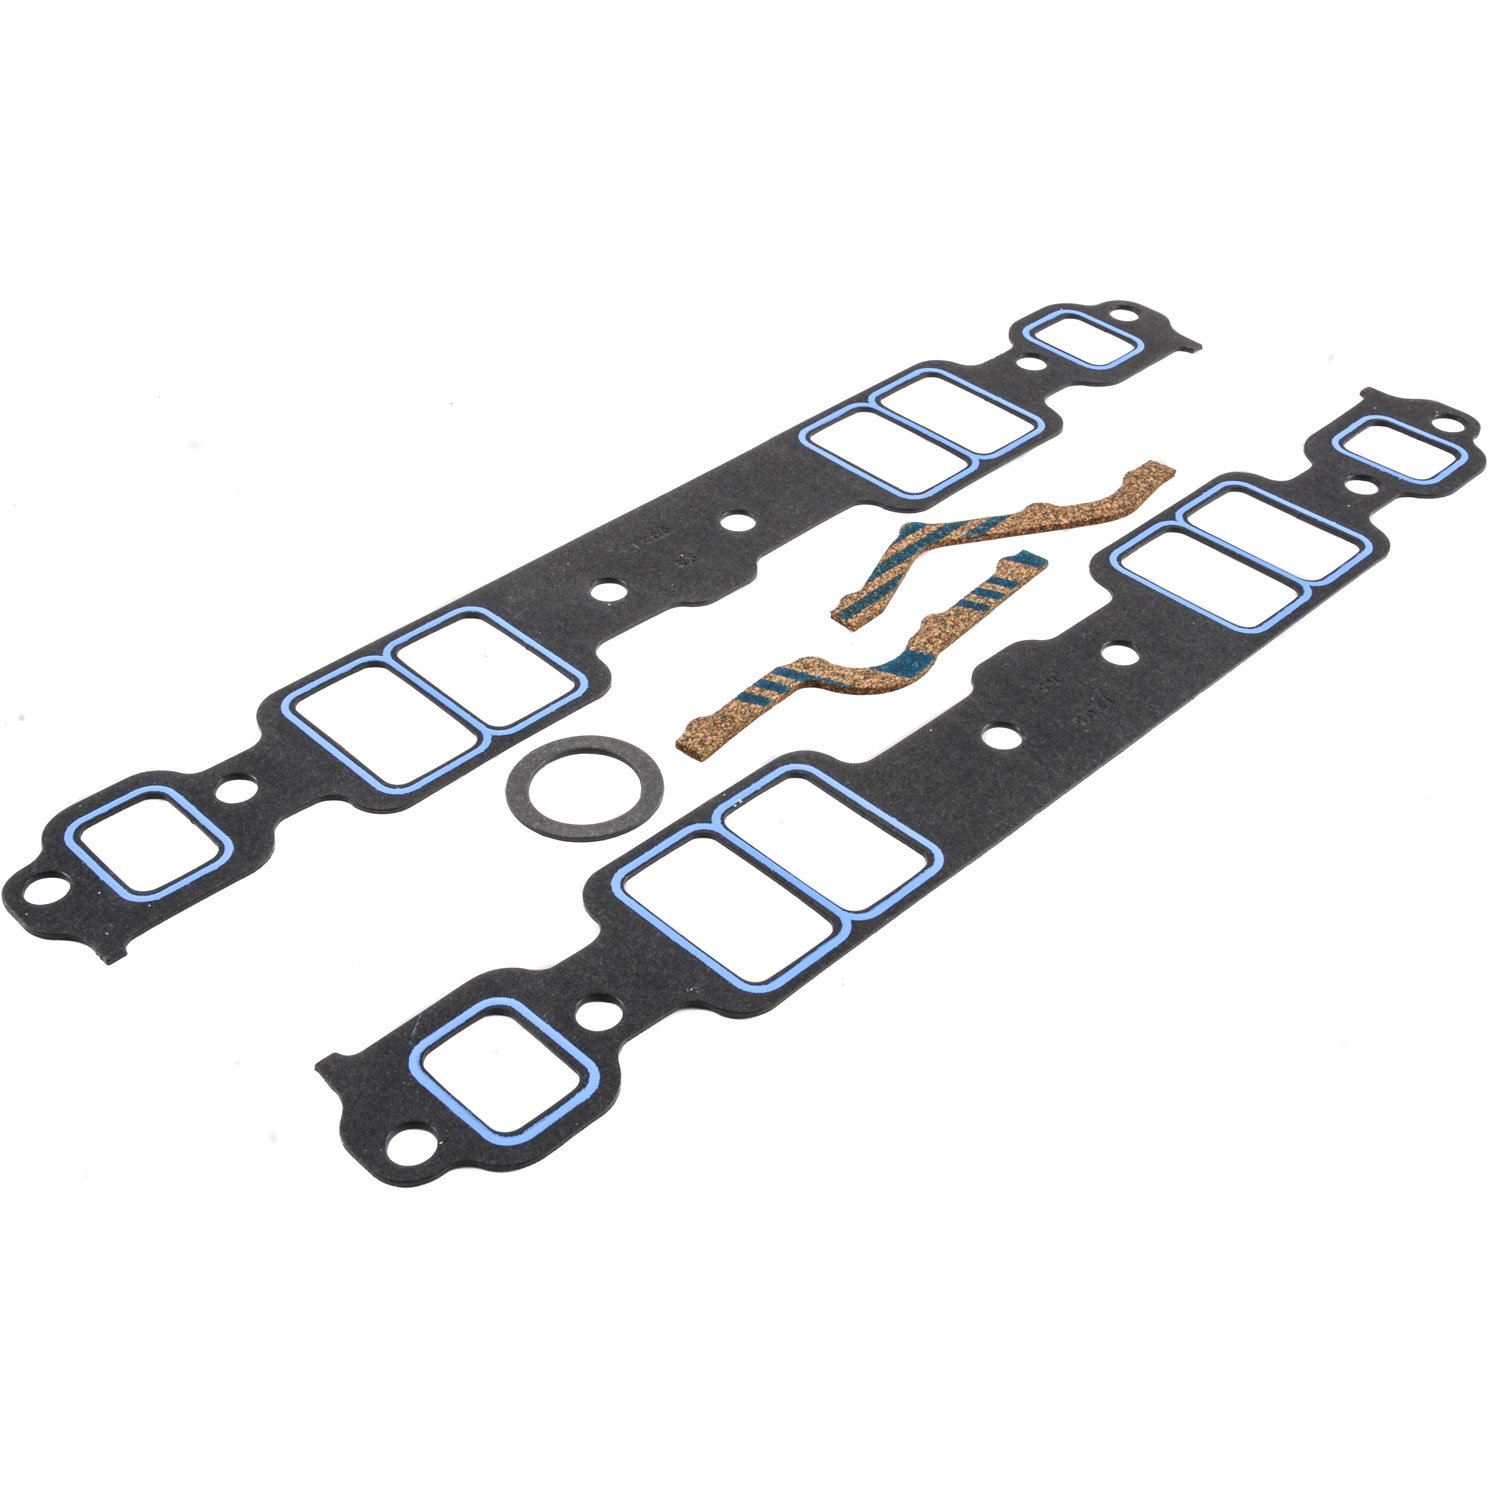 H/P Intake Gasket Small Block Chevy 262-400 V8 Engines